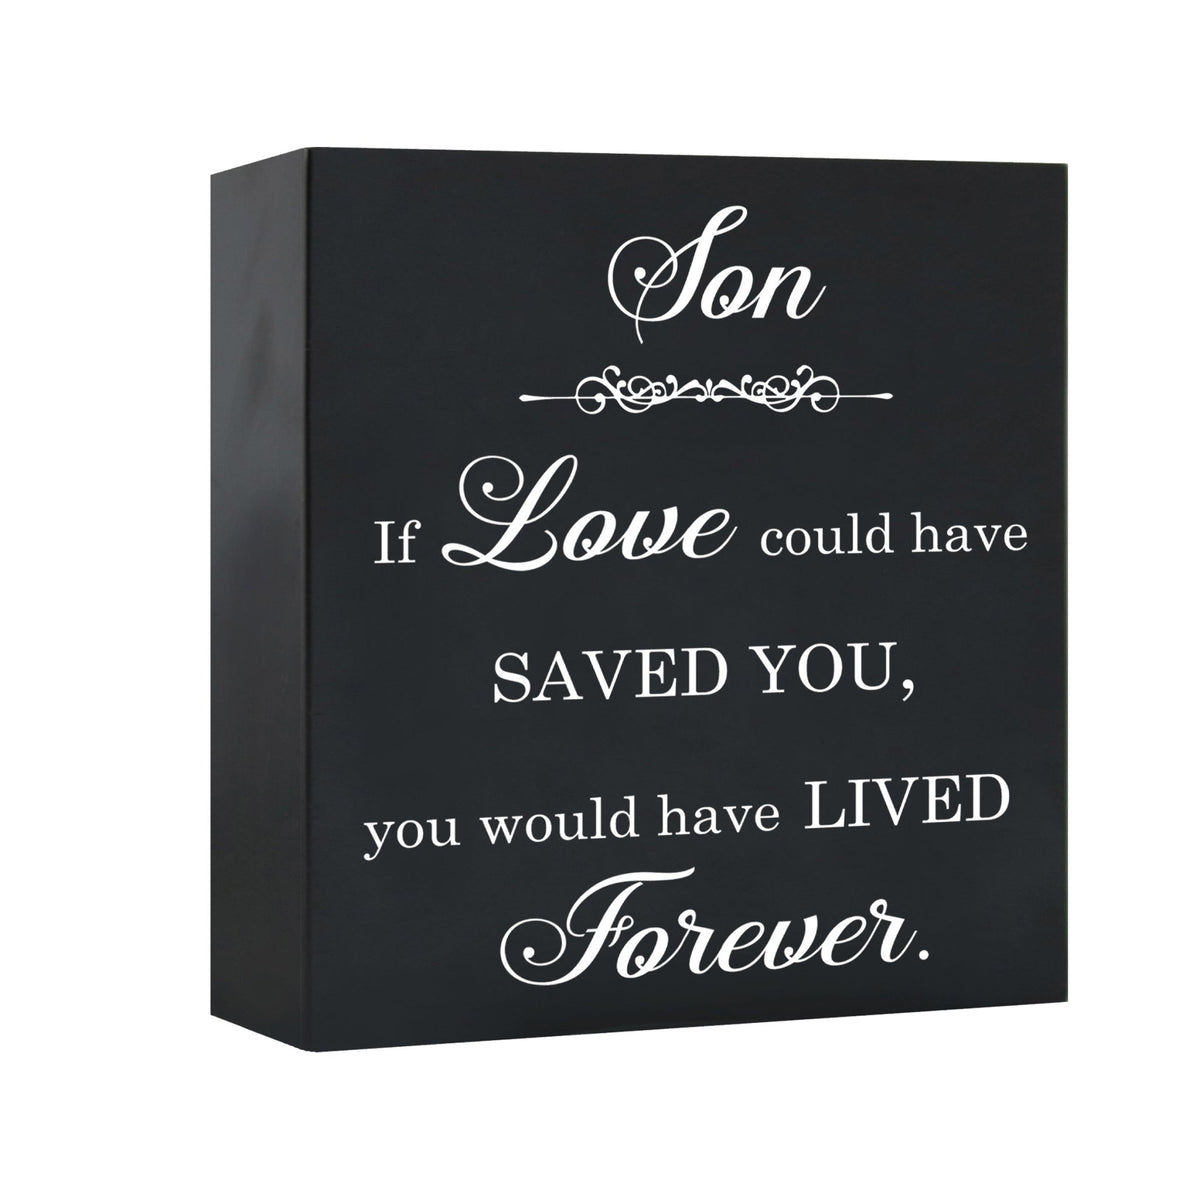 Memorial Keepsake Wooden Cremation Shadow Box and Urn 10x10in Holds 189 Cu Inches Of Human Ashes Son, If Love Could - LifeSong Milestones